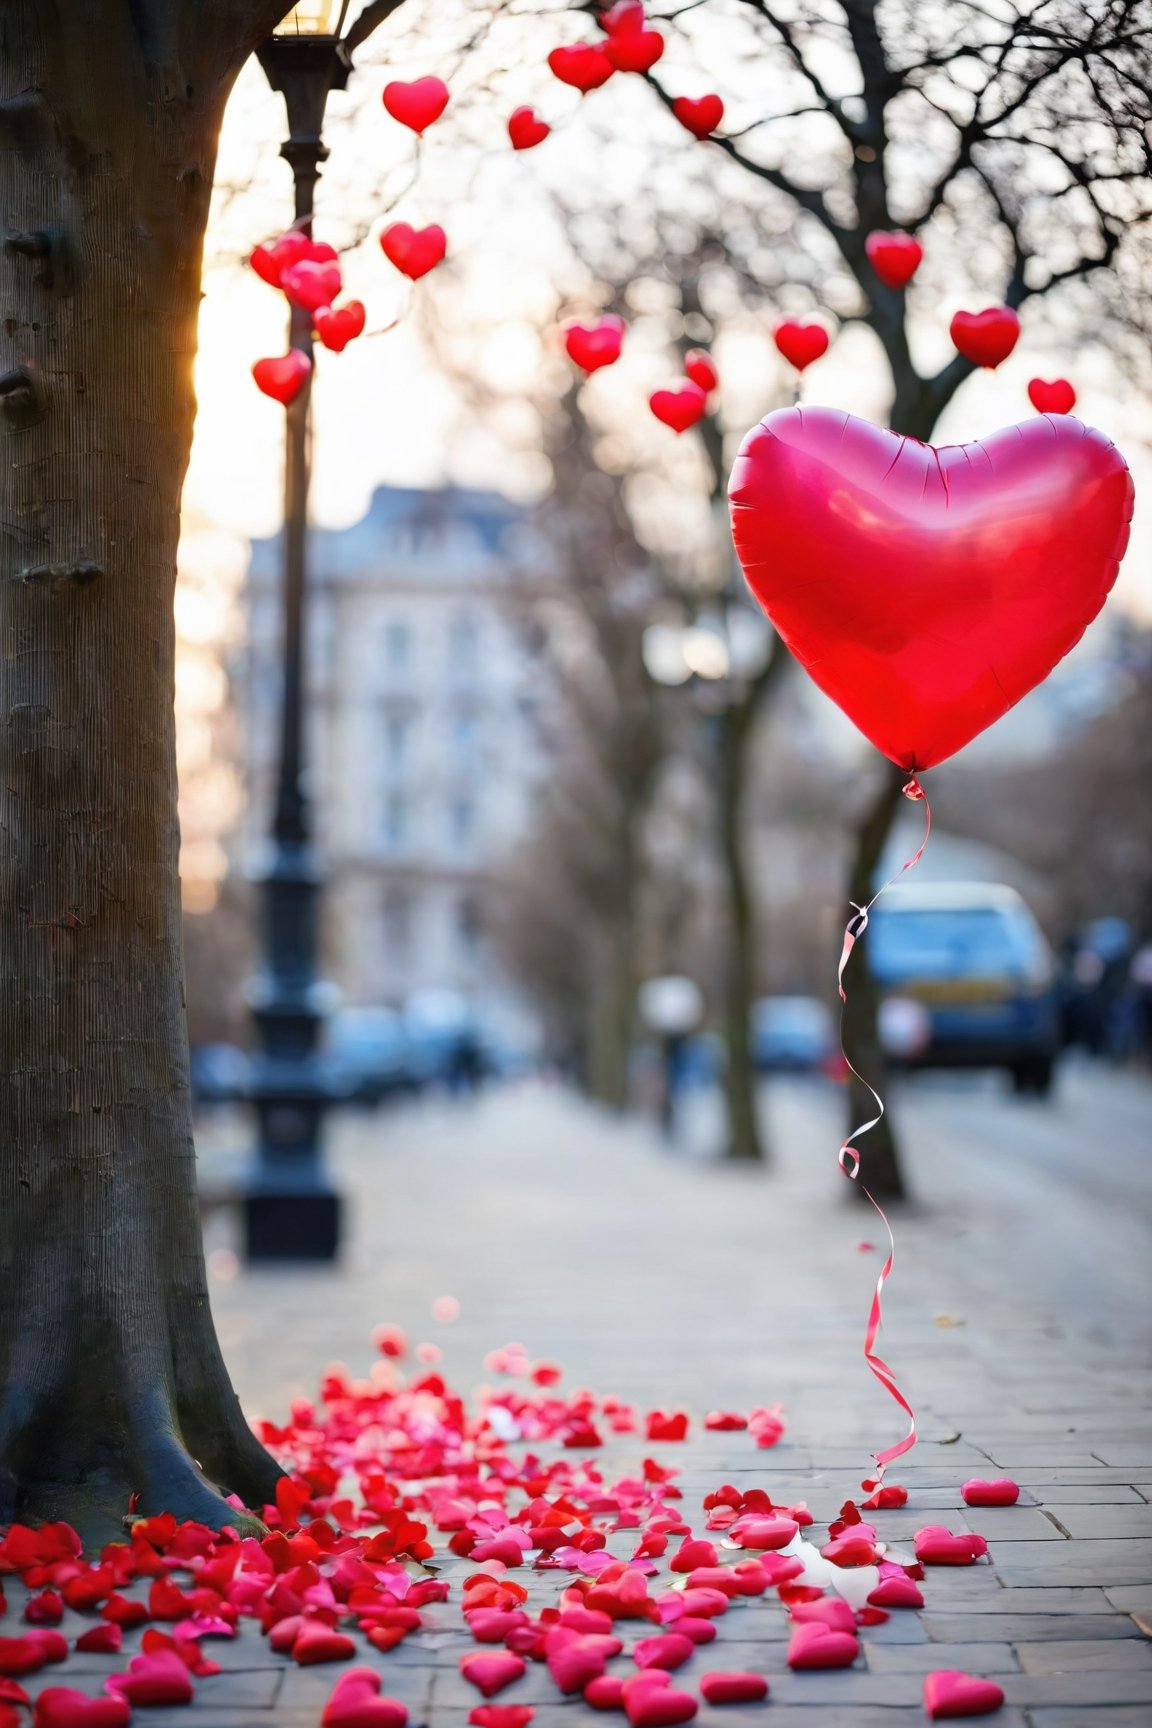 AiArtV,Valentines Day,flower,heart,outdoors,blurry,tree,petals,depth of field,building,scenery,blurry foreground,balloon,lamppost,heart balloon